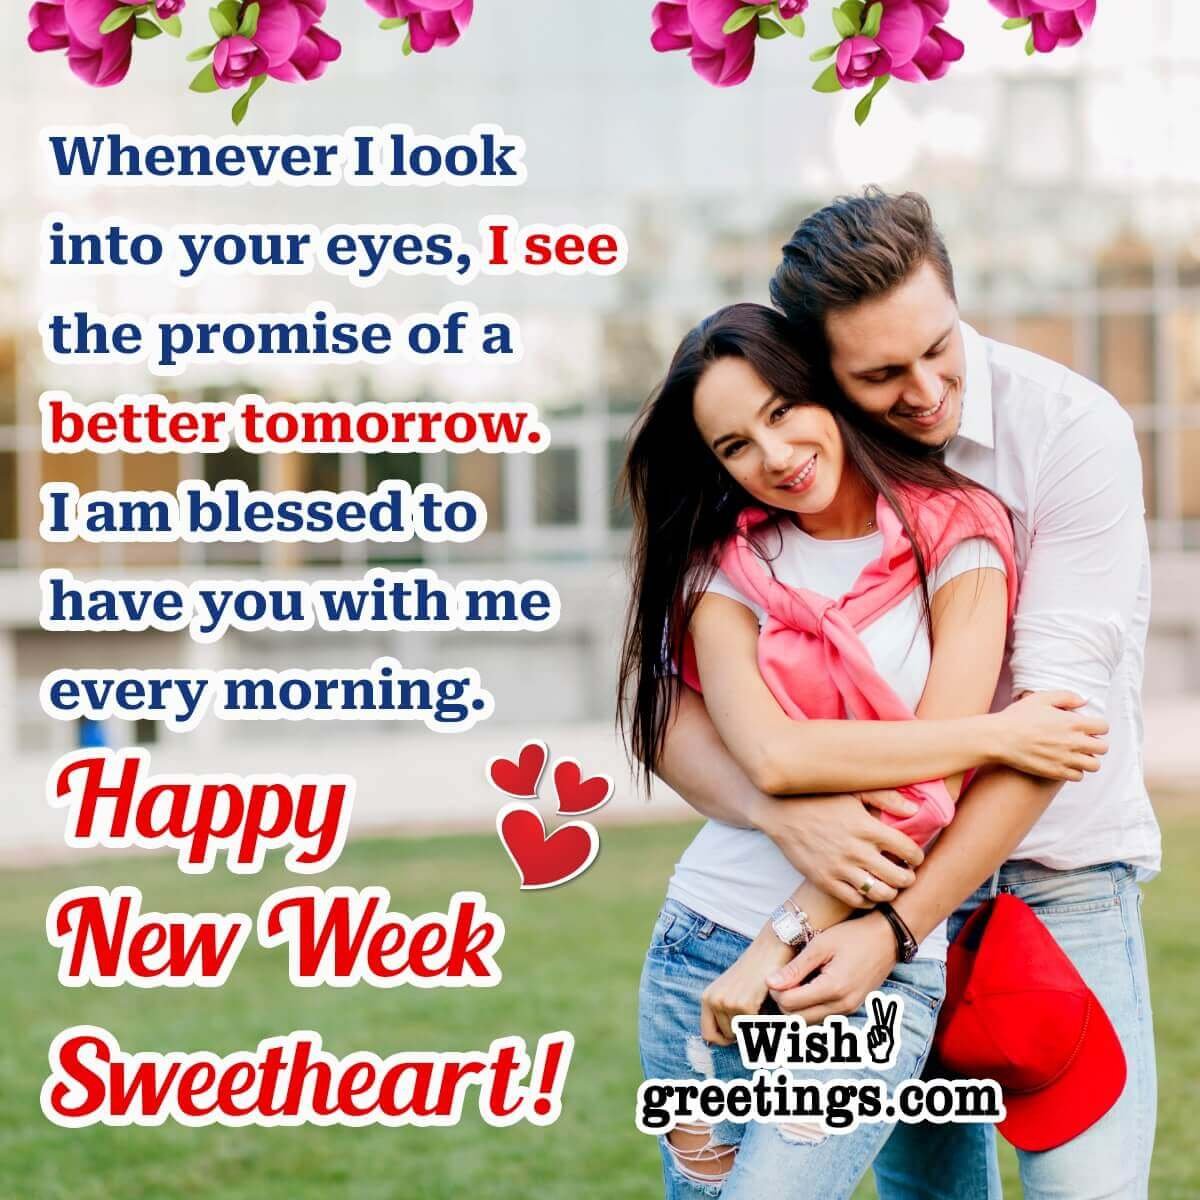 Happy New Week Romantic Message Image For Sweetheart